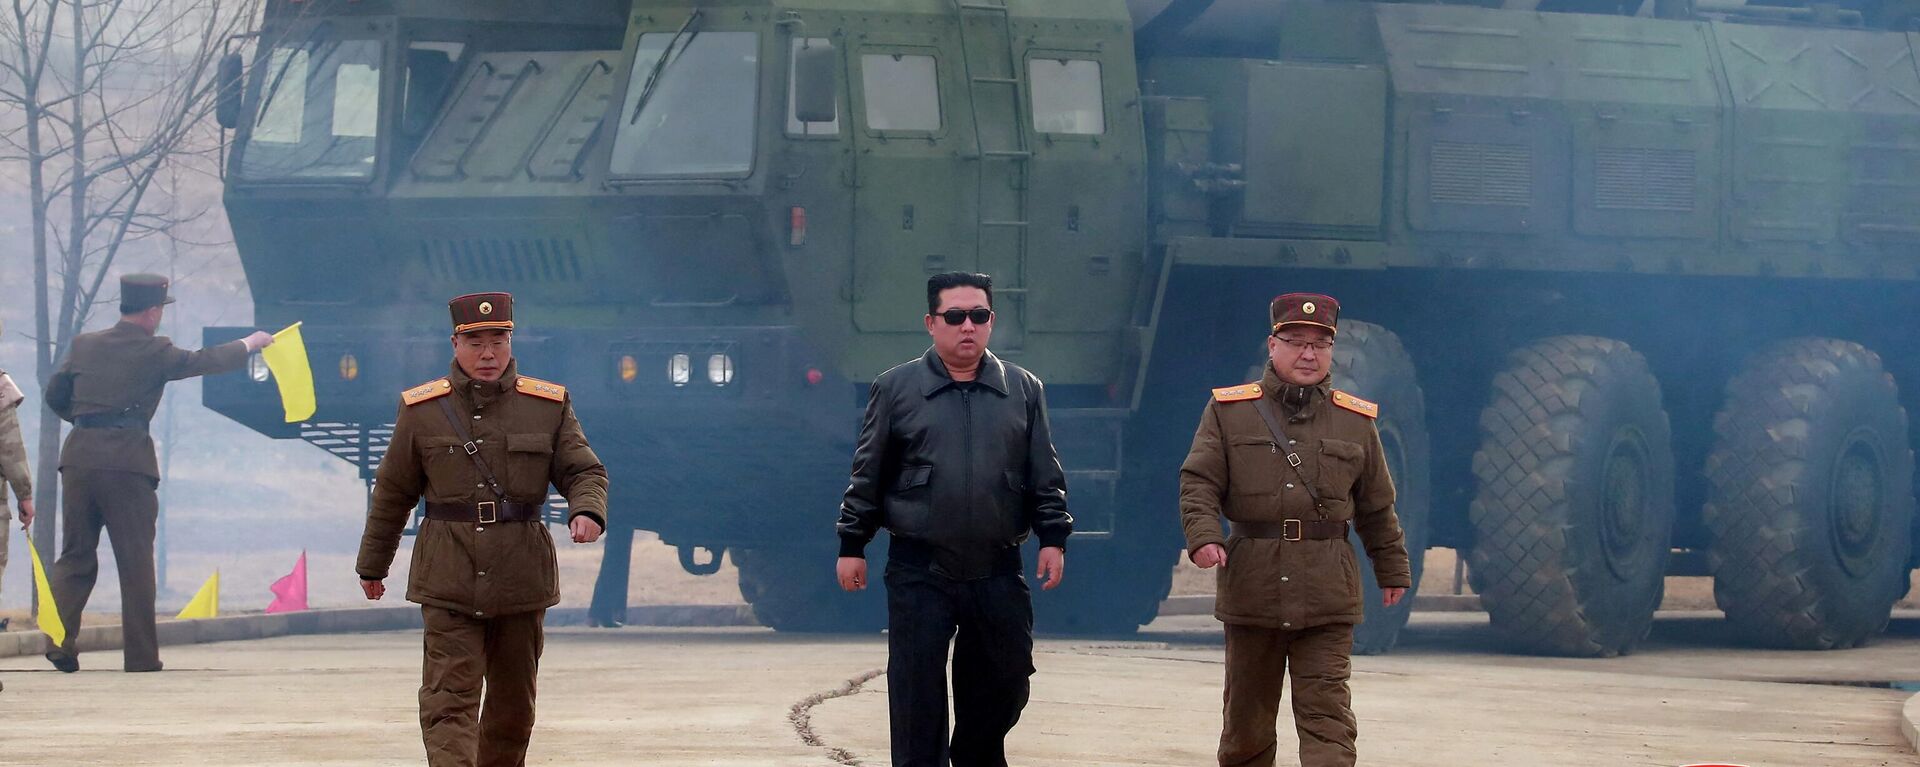 North Korean leader Kim Jong Un walks away from what state media report is a new type of intercontinental ballistic missile (ICBM) in this undated photo released on March 24, 2022 by North Korea's Korean Central News Agency (KCNA).  - Sputnik International, 1920, 24.03.2022